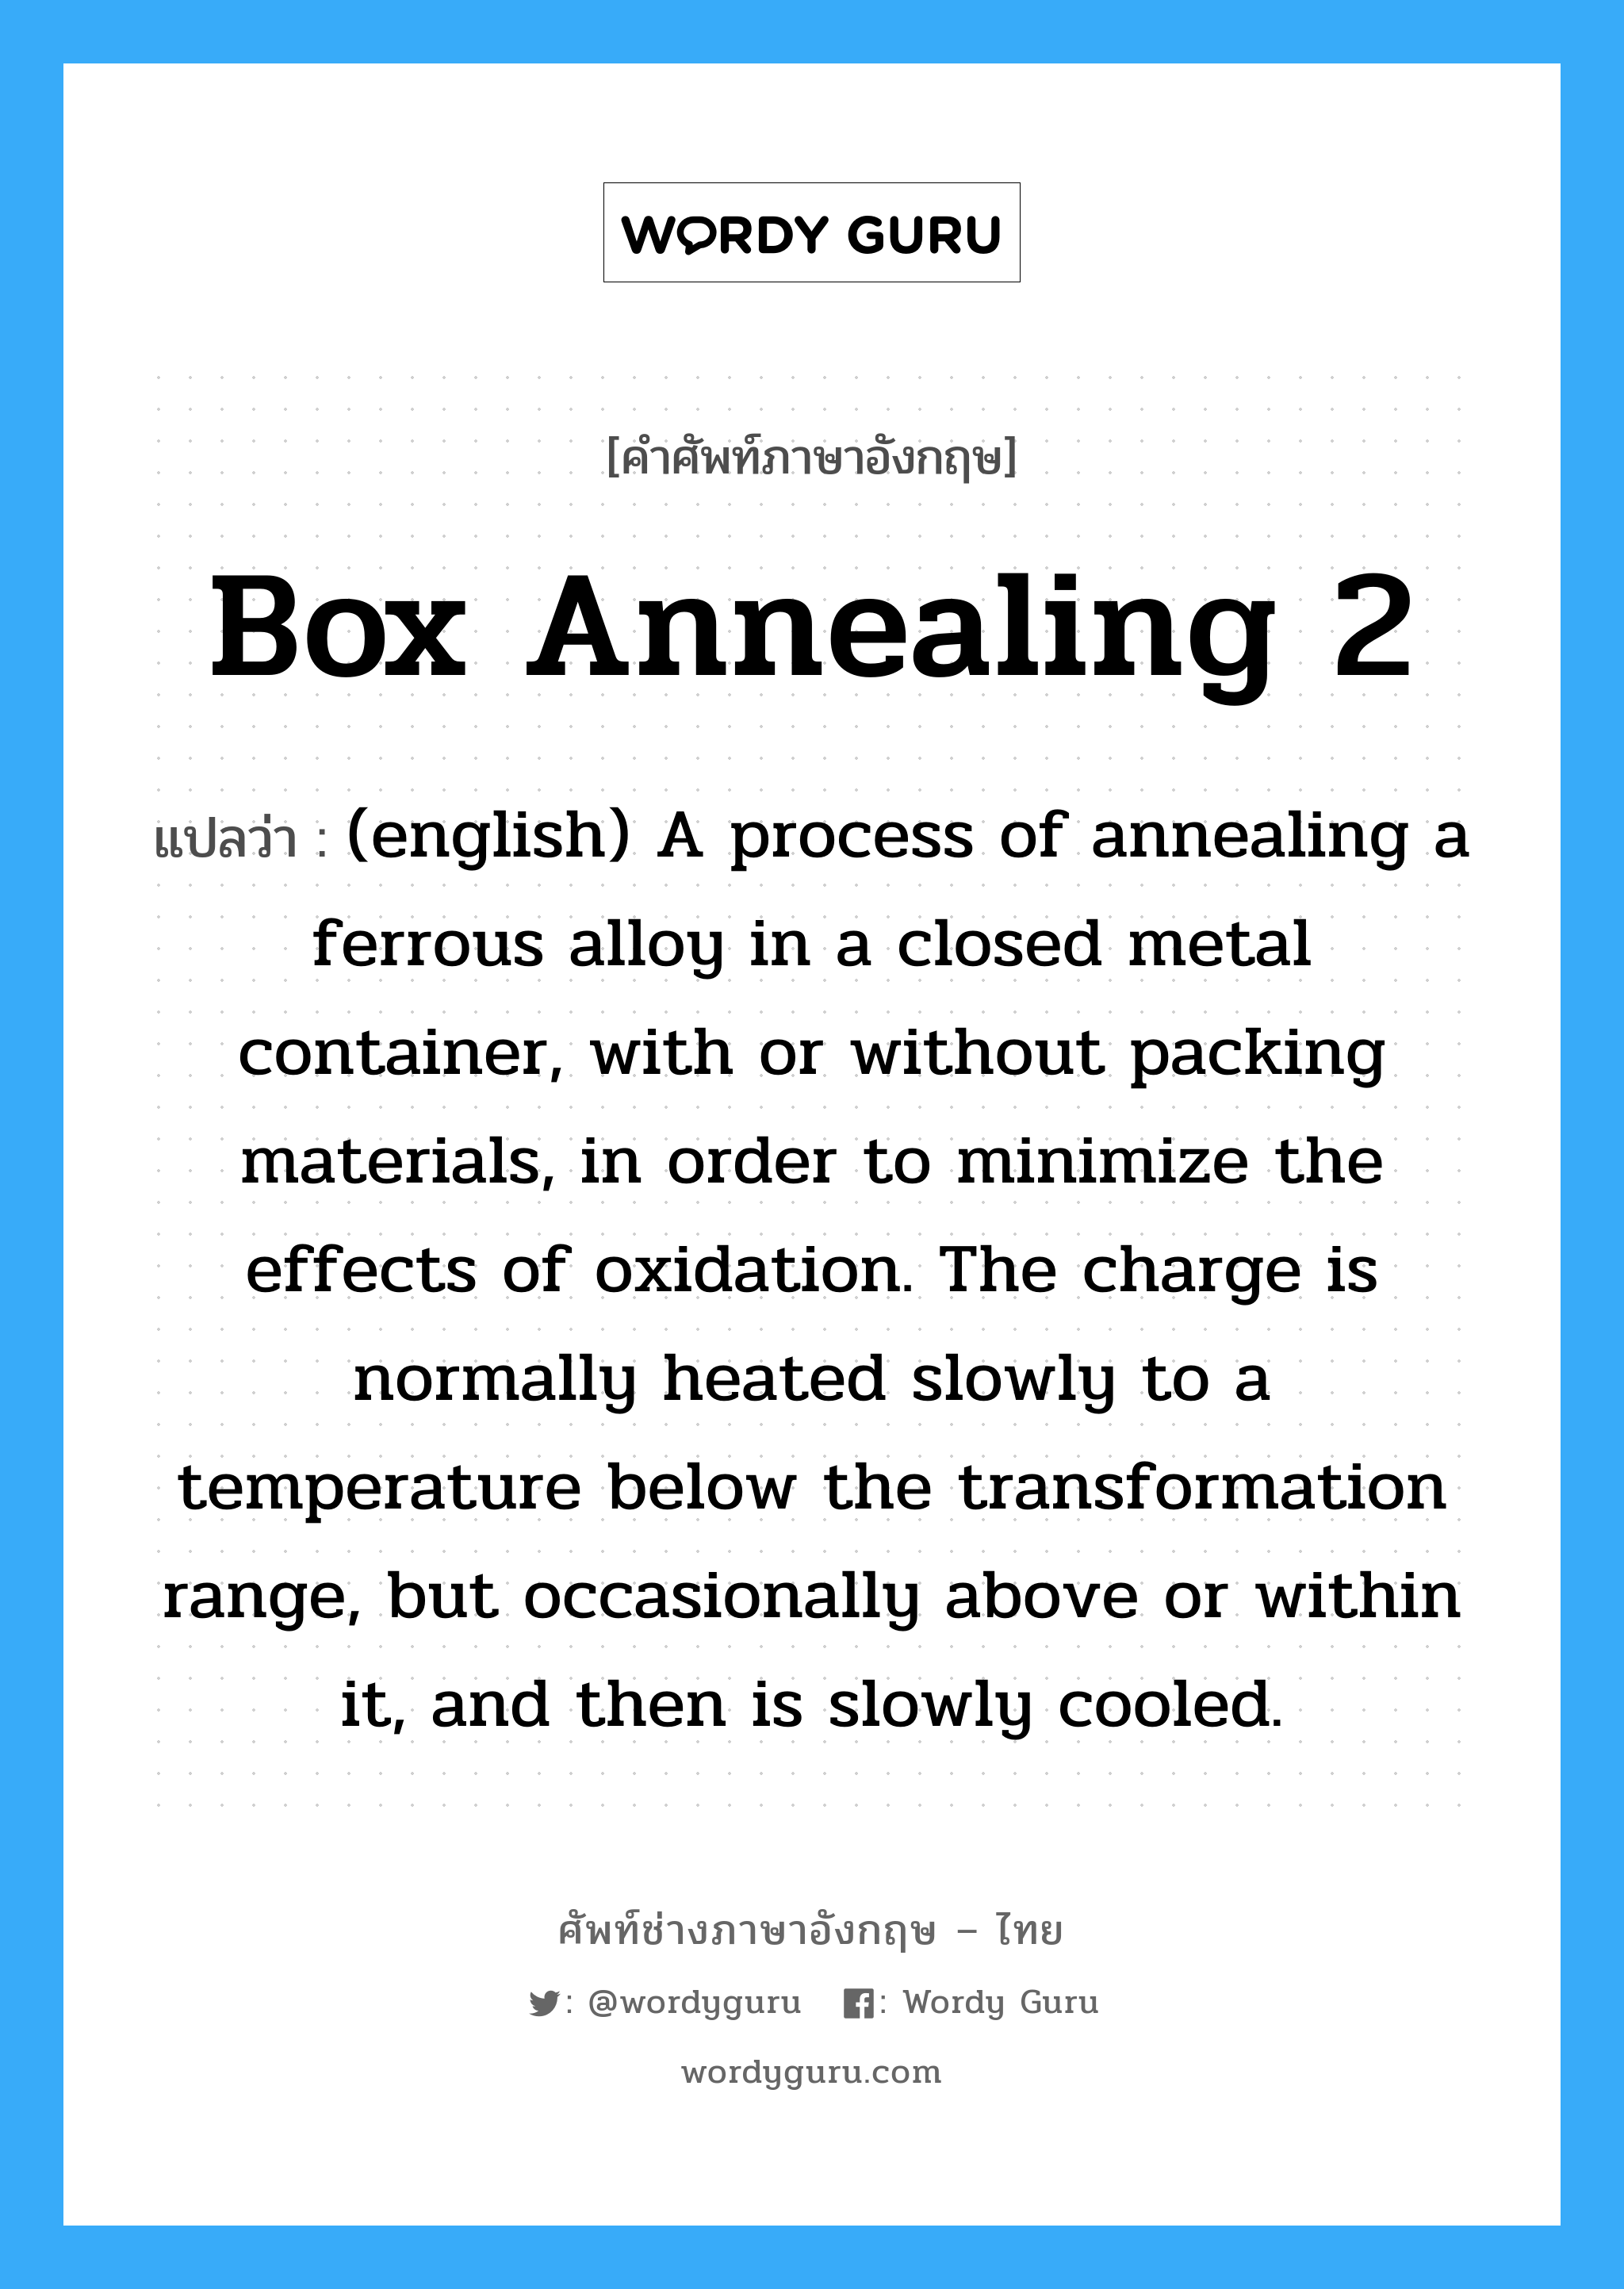 Box Annealing 2 แปลว่า?, คำศัพท์ช่างภาษาอังกฤษ - ไทย Box Annealing 2 คำศัพท์ภาษาอังกฤษ Box Annealing 2 แปลว่า (english) A process of annealing a ferrous alloy in a closed metal container, with or without packing materials, in order to minimize the effects of oxidation. The charge is normally heated slowly to a temperature below the transformation range, but occasionally above or within it, and then is slowly cooled.